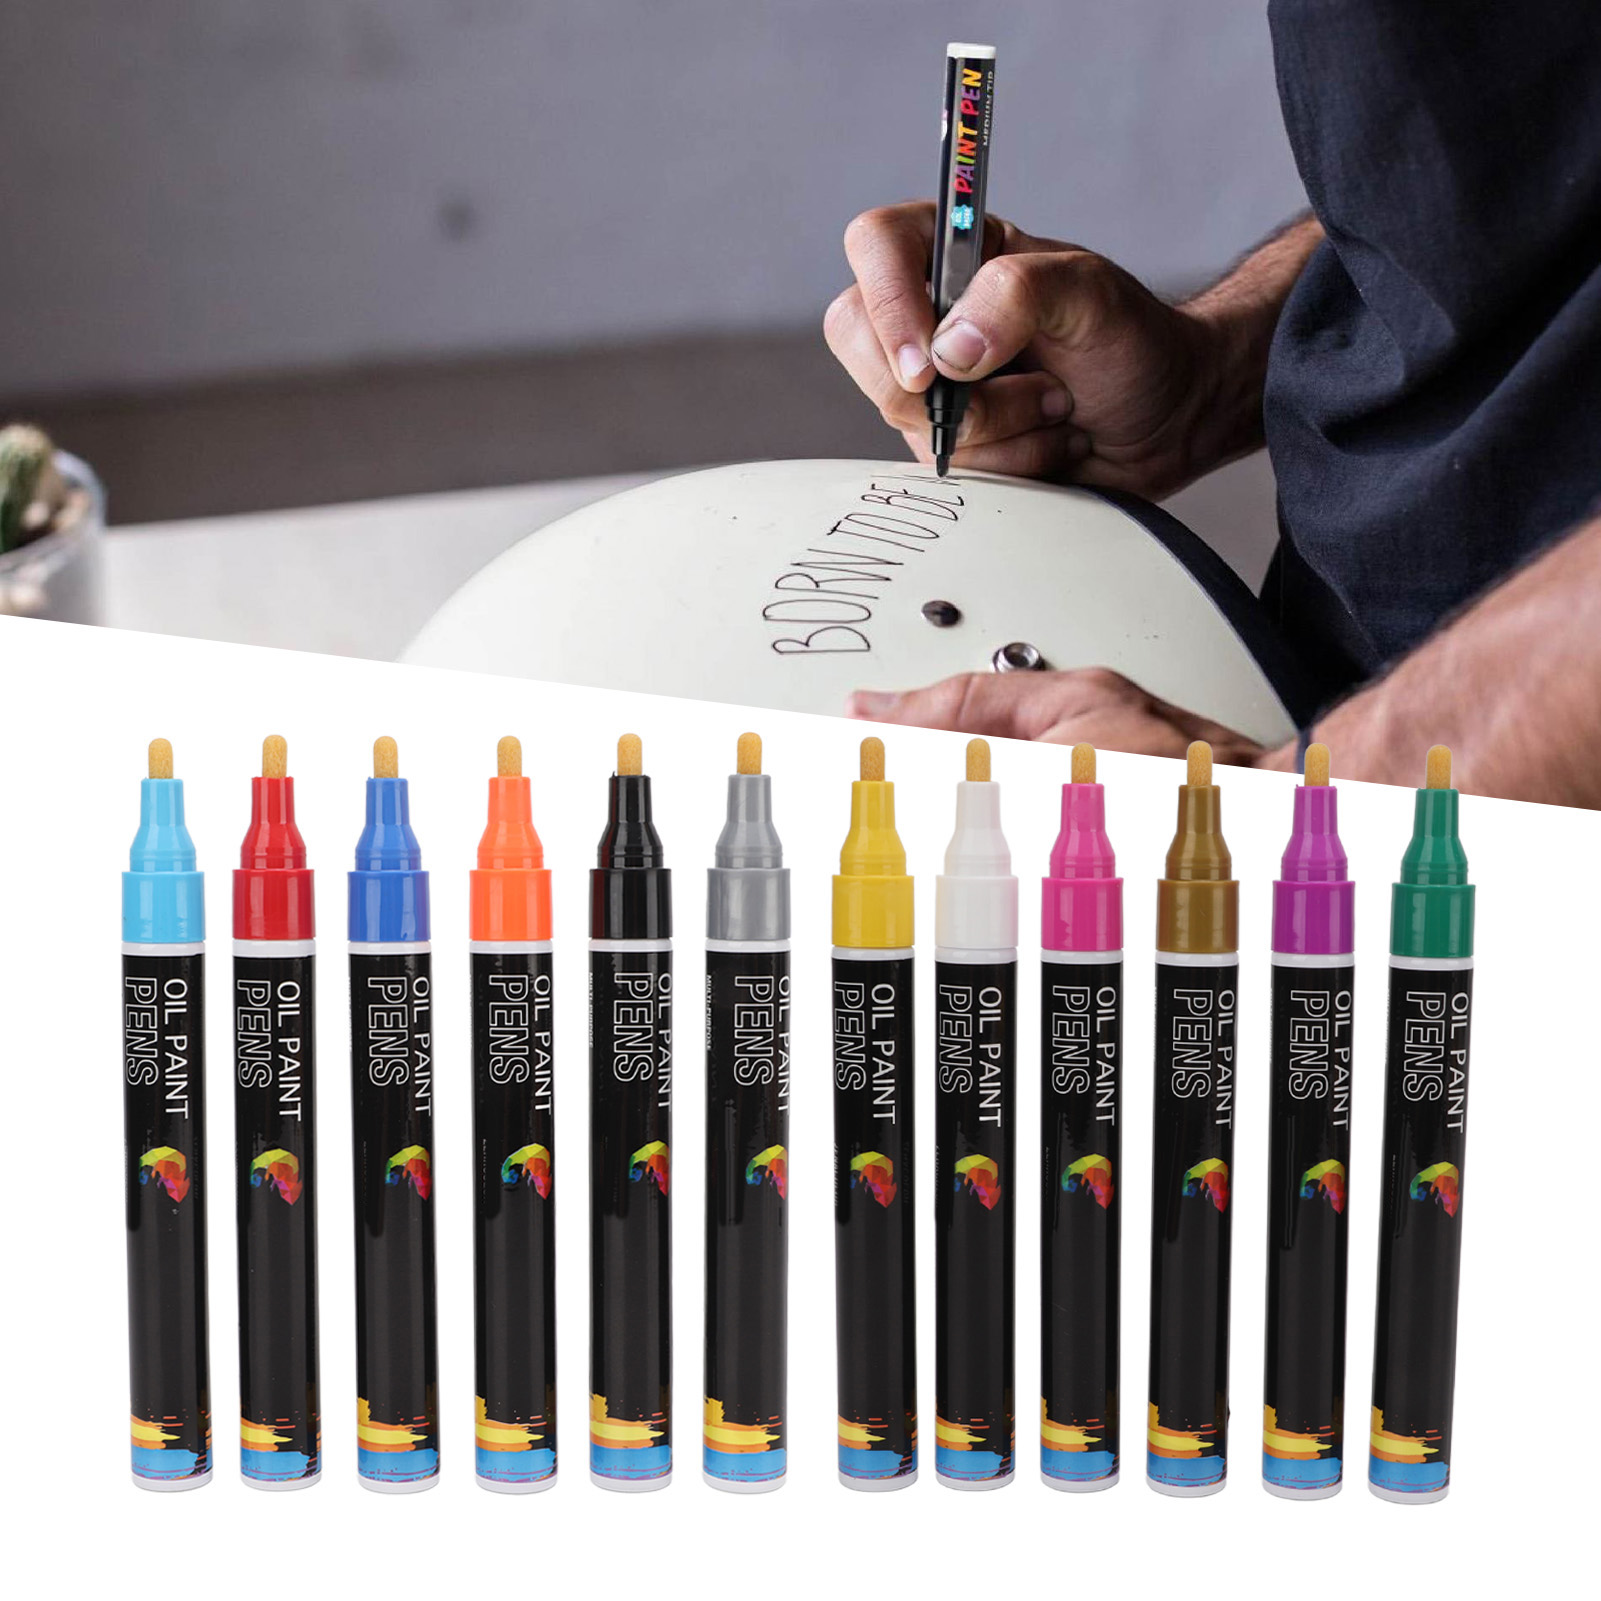 Oil Based Paint Markers, Portable Storage Case Paint Marker Safe Large  Capacity For Art Painting For Above 3 Years Old 